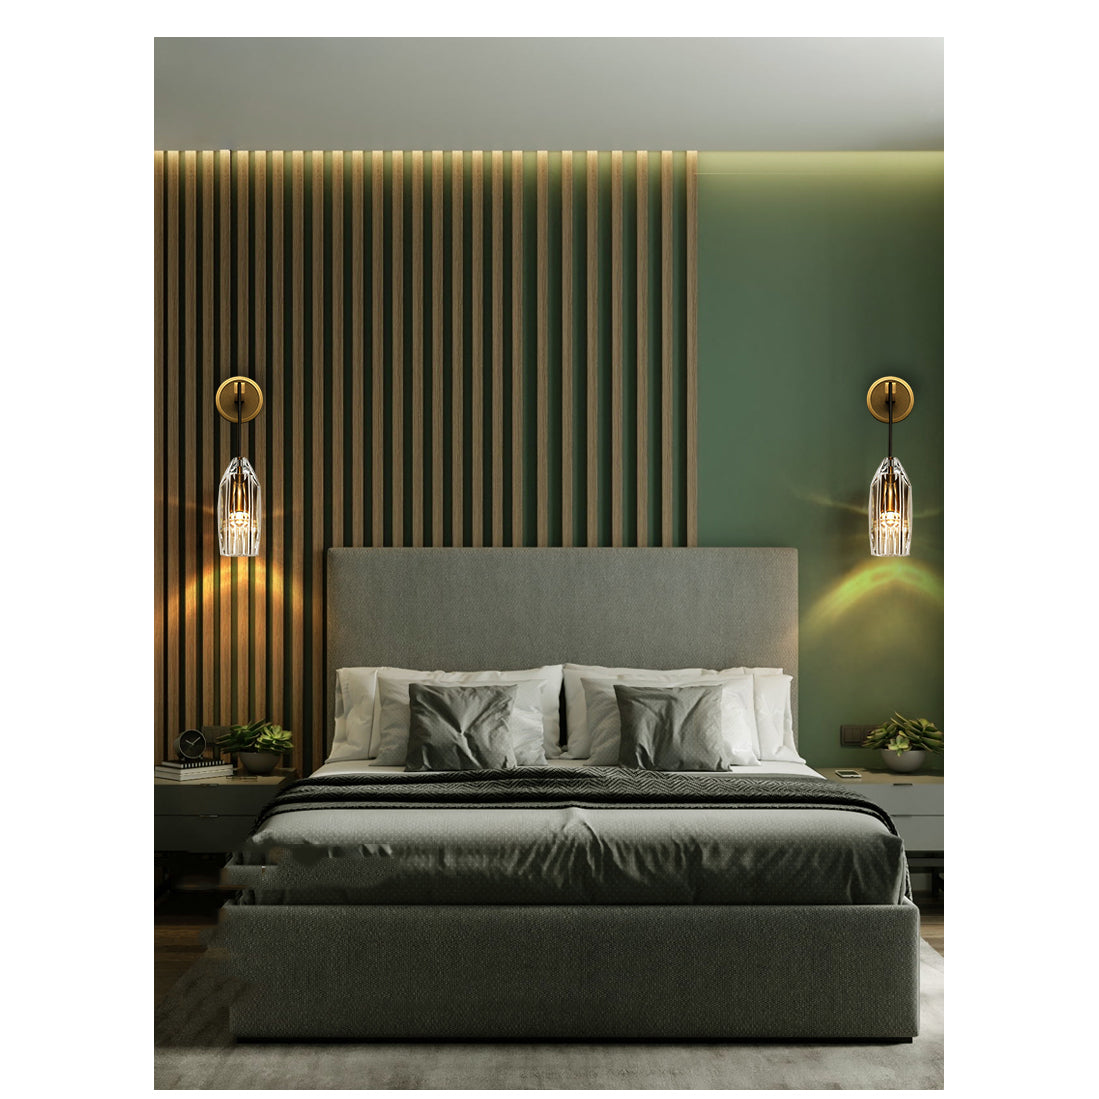 Chrissi Modern Modern Crystal Luxury Wall Light Fixture For Bedroom Wall Sconce Kevin Studio Inc   